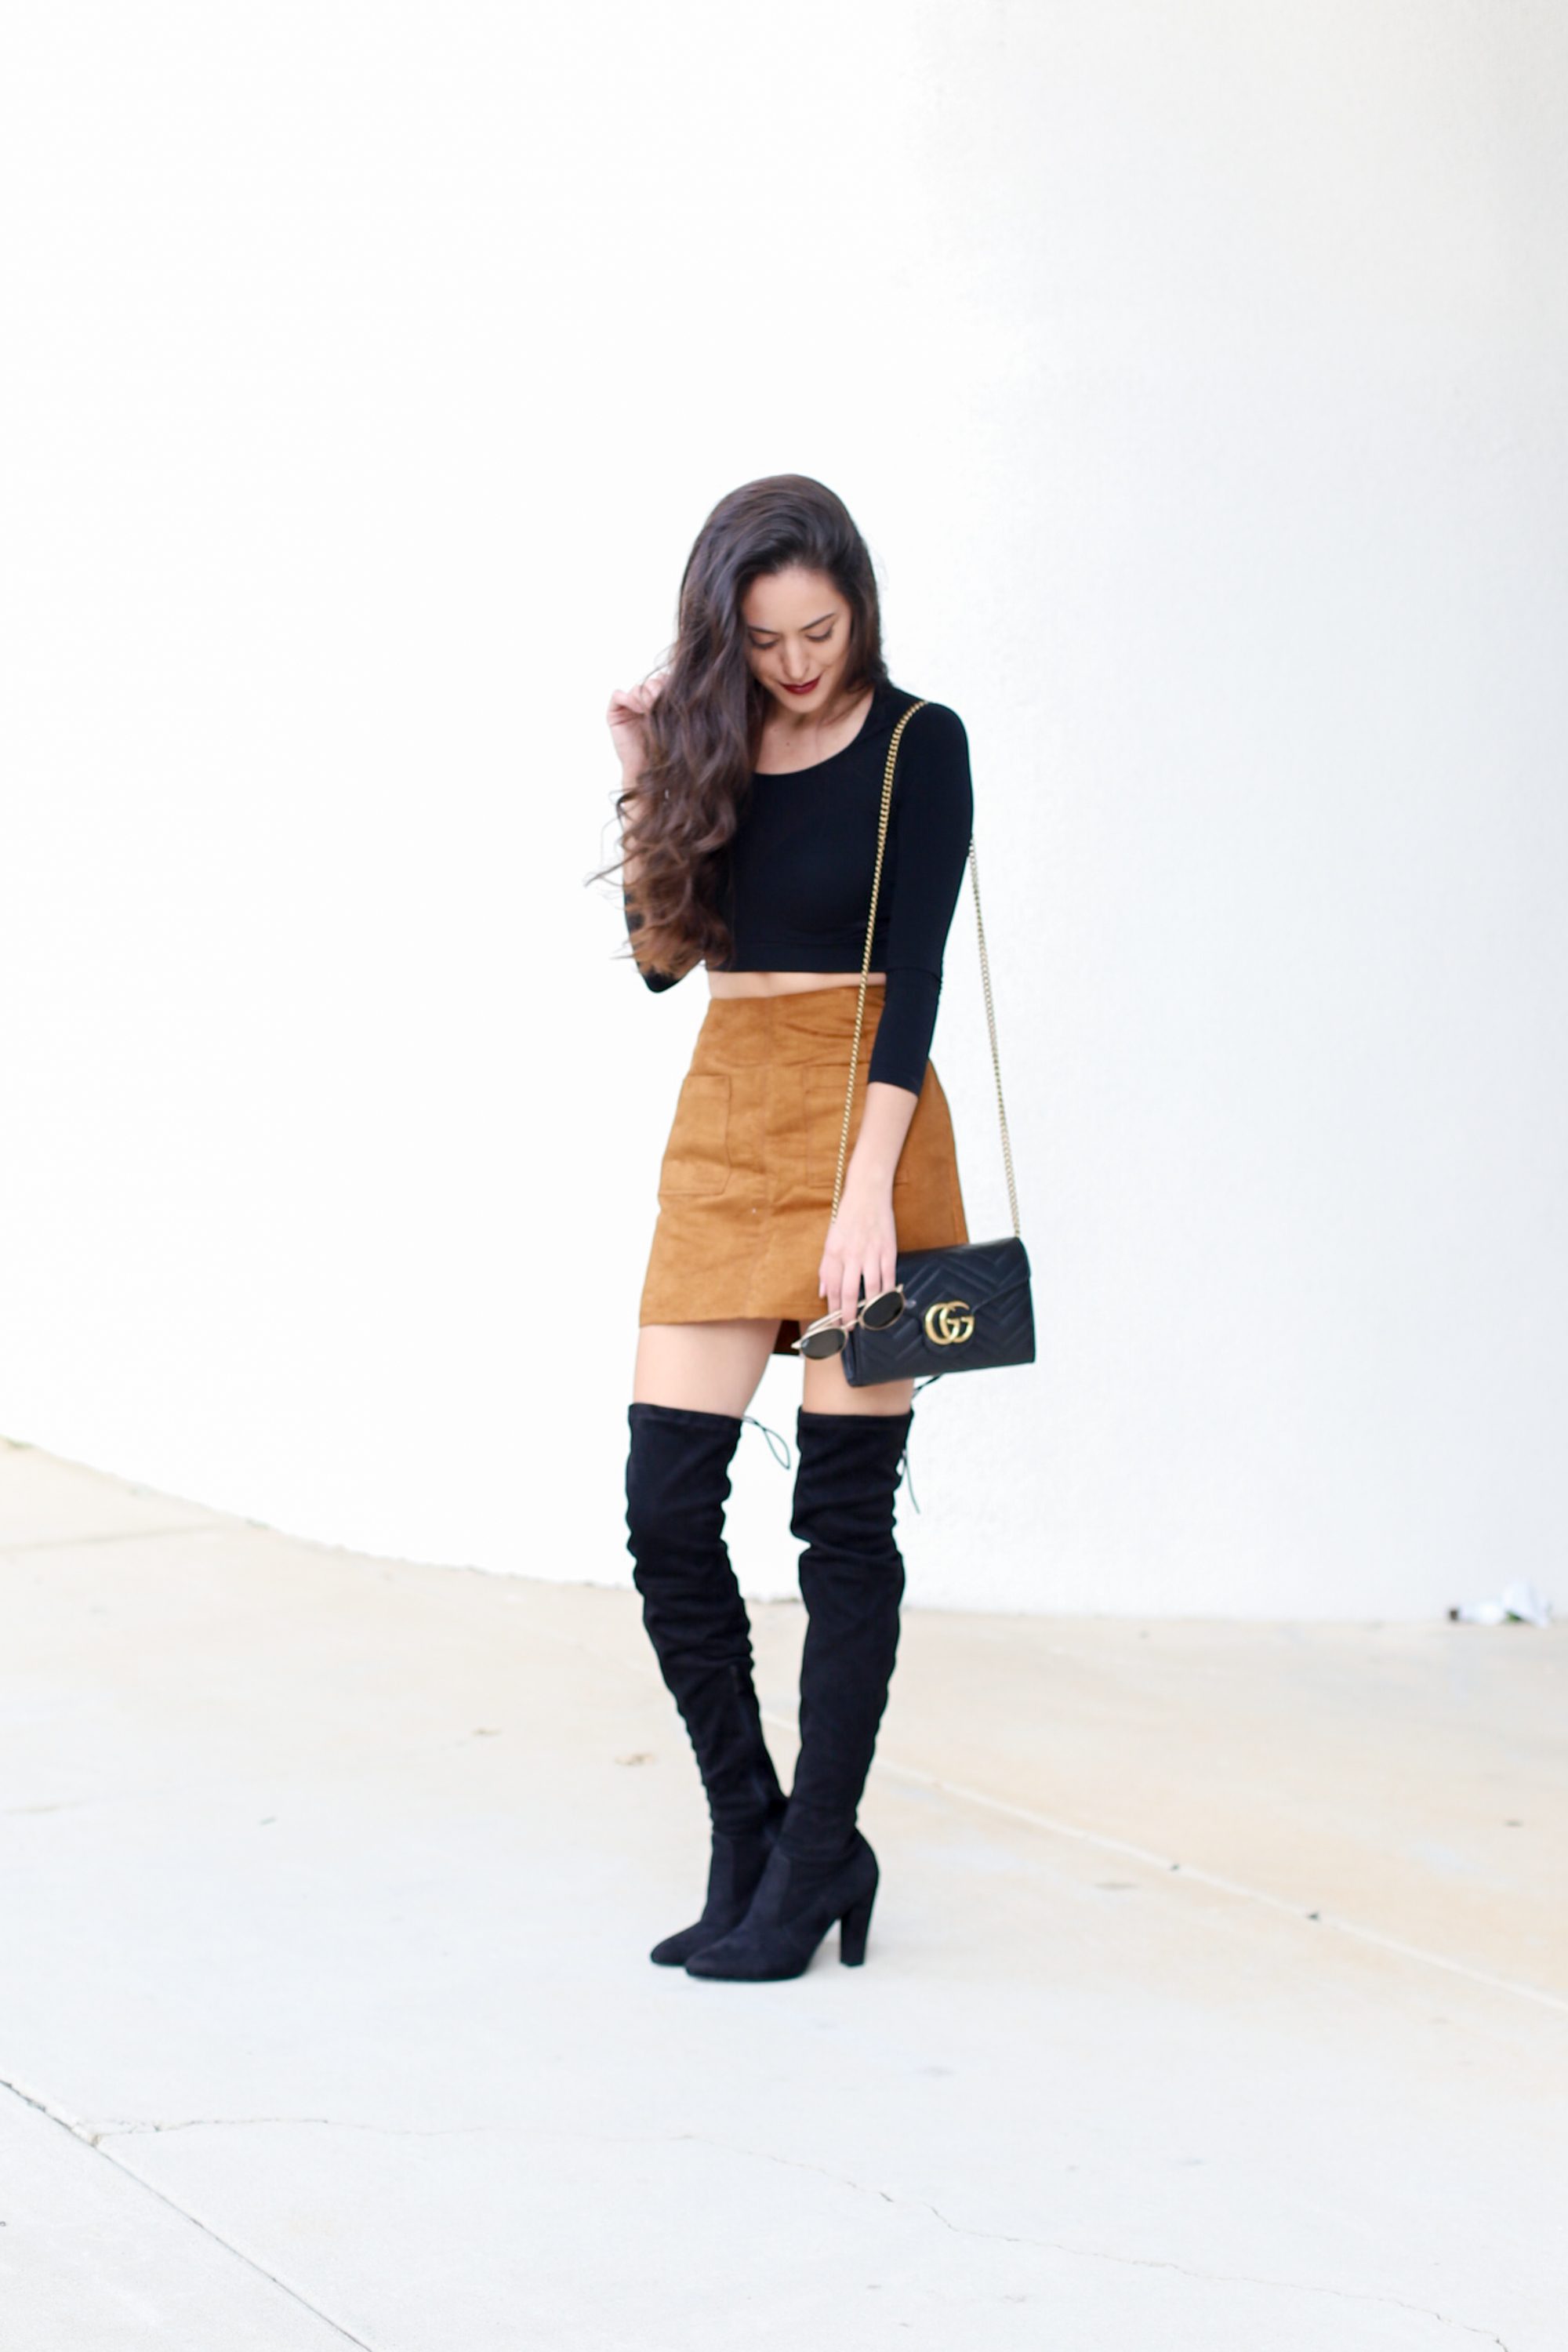 suede mini, otk boots, fall outfit ideas, fall outfit inspiration, fall looks, mini skirt with over the knee boots, how to style a mini skirt, what to wear with over the knee boots, how to wear a crop top in fall